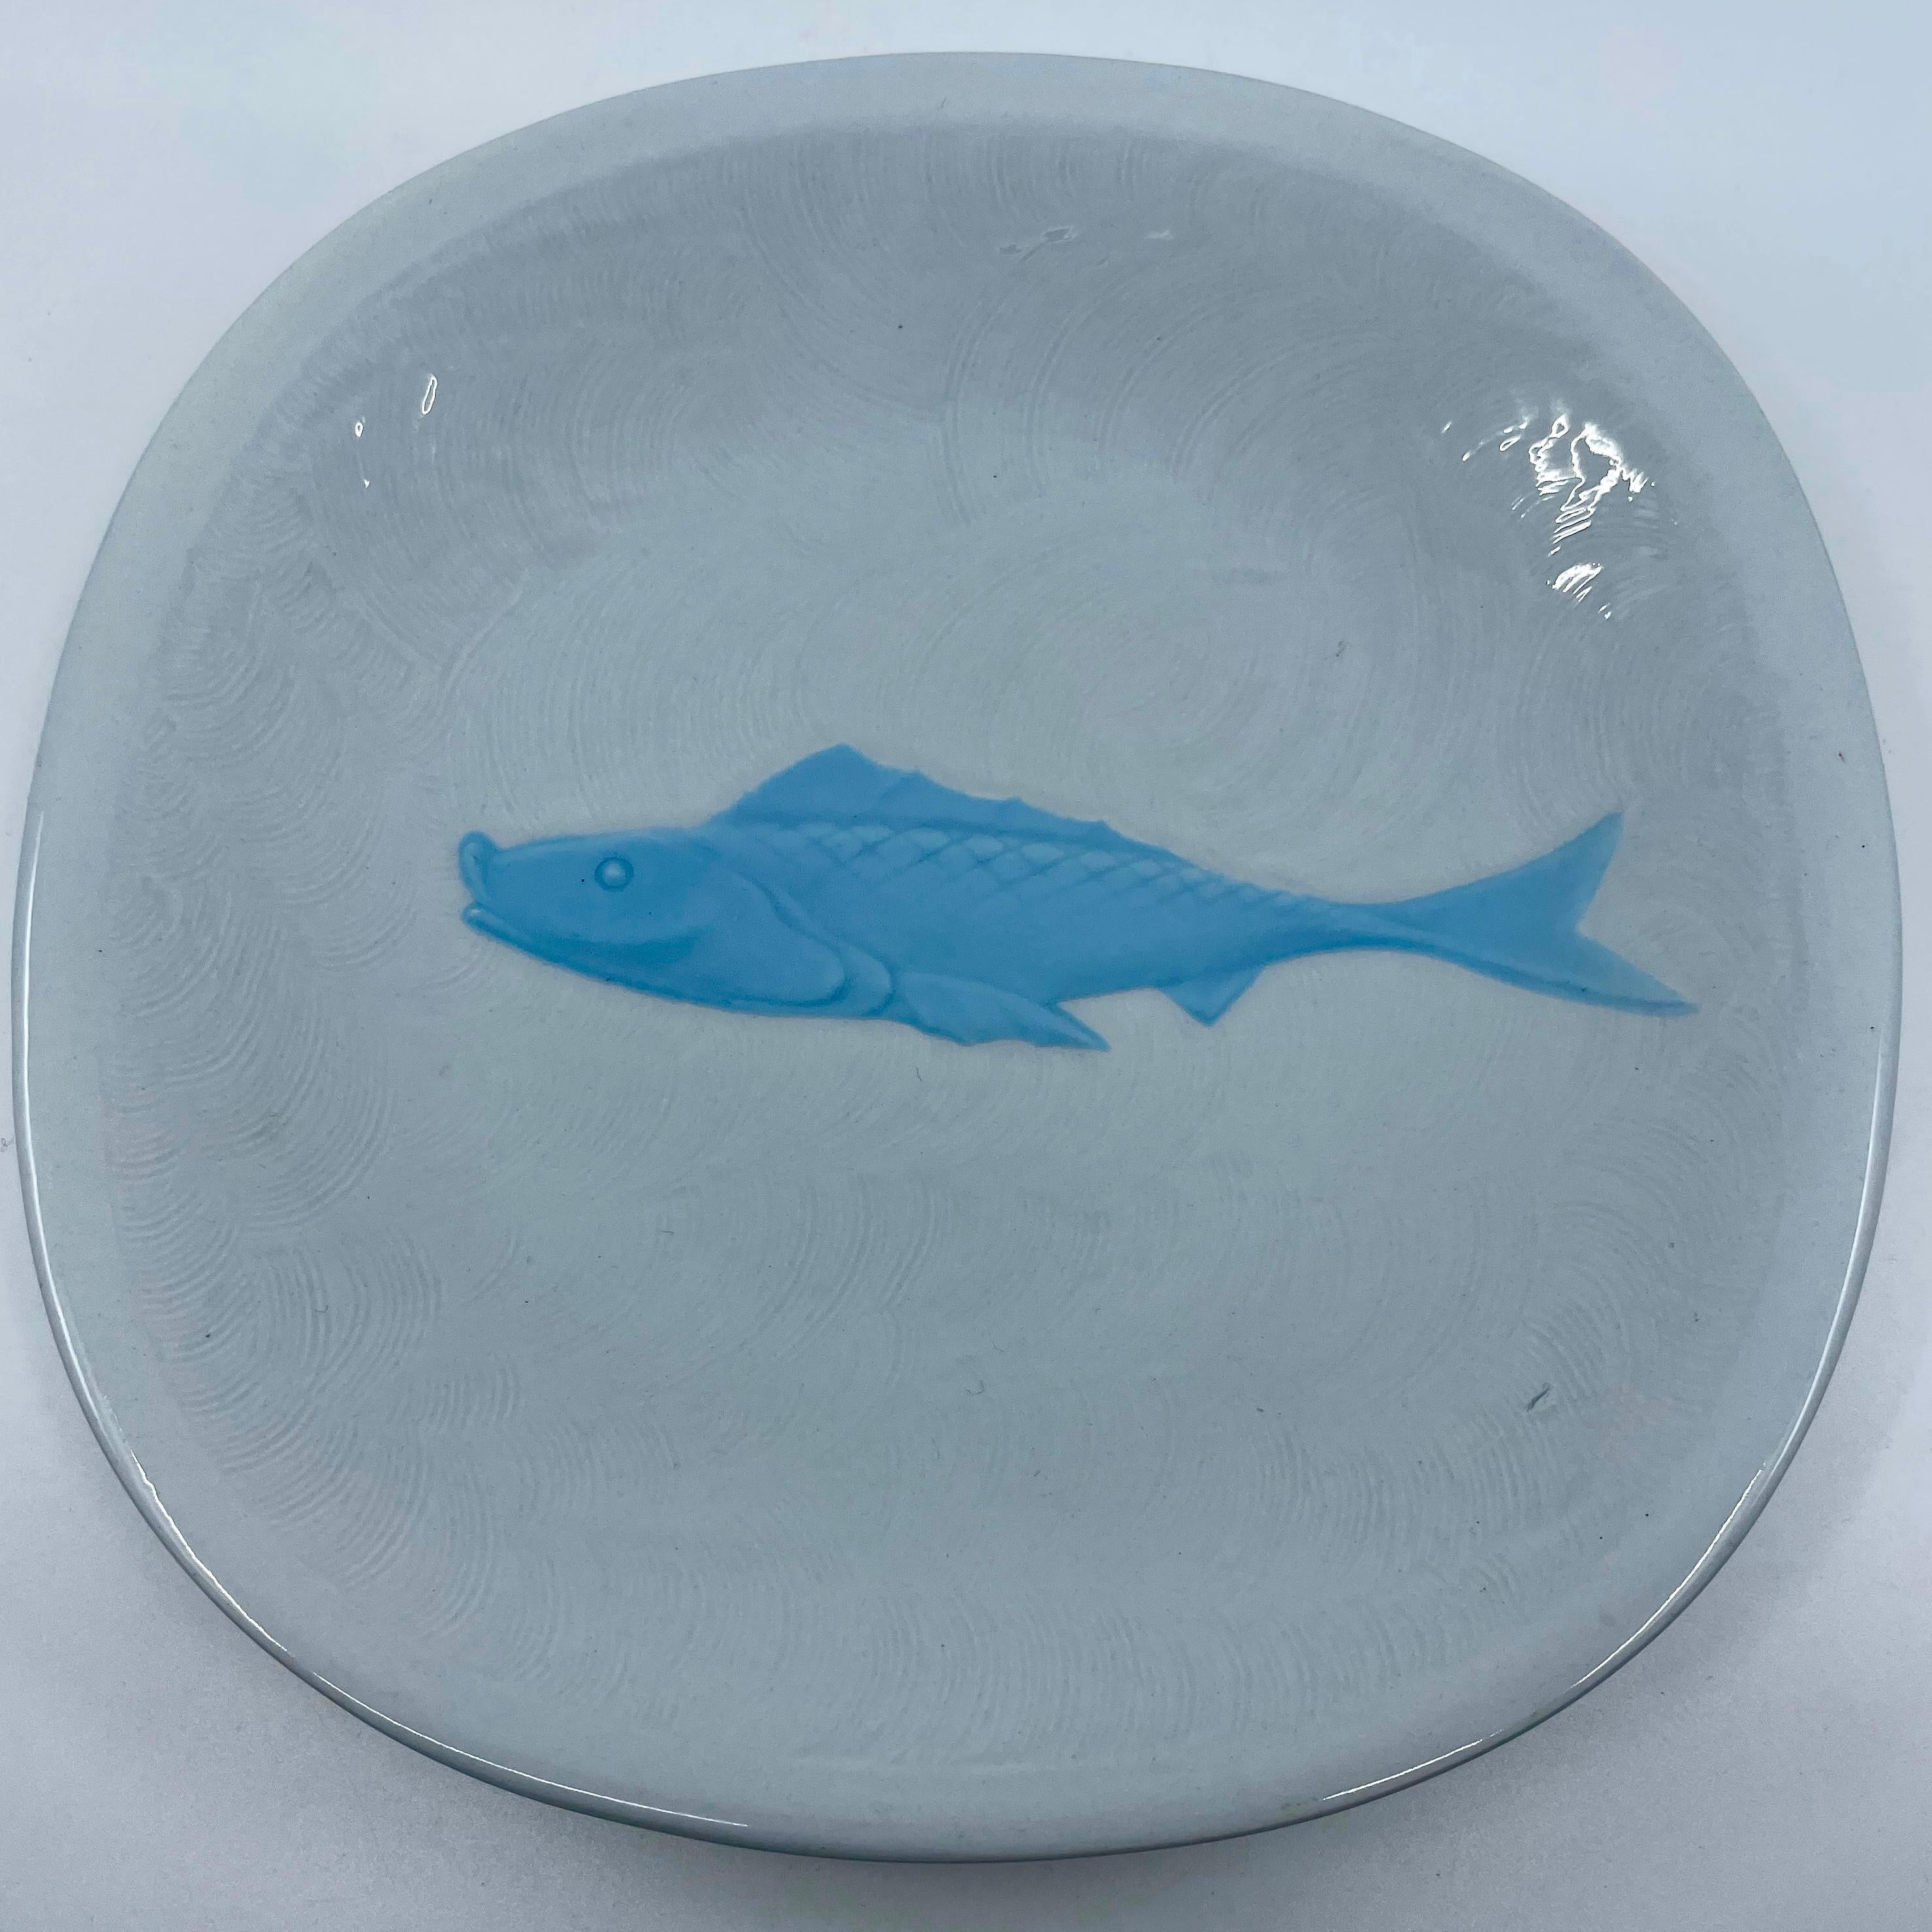 Set of eight blue and white majolica fish plates. Pale blue and white ceramic plates featuring raised center fish in icy blue, surrounded by combed wave pattern with markings for Galvani Ceramiche. Italy, 1930's.
Dimensions: 9.5